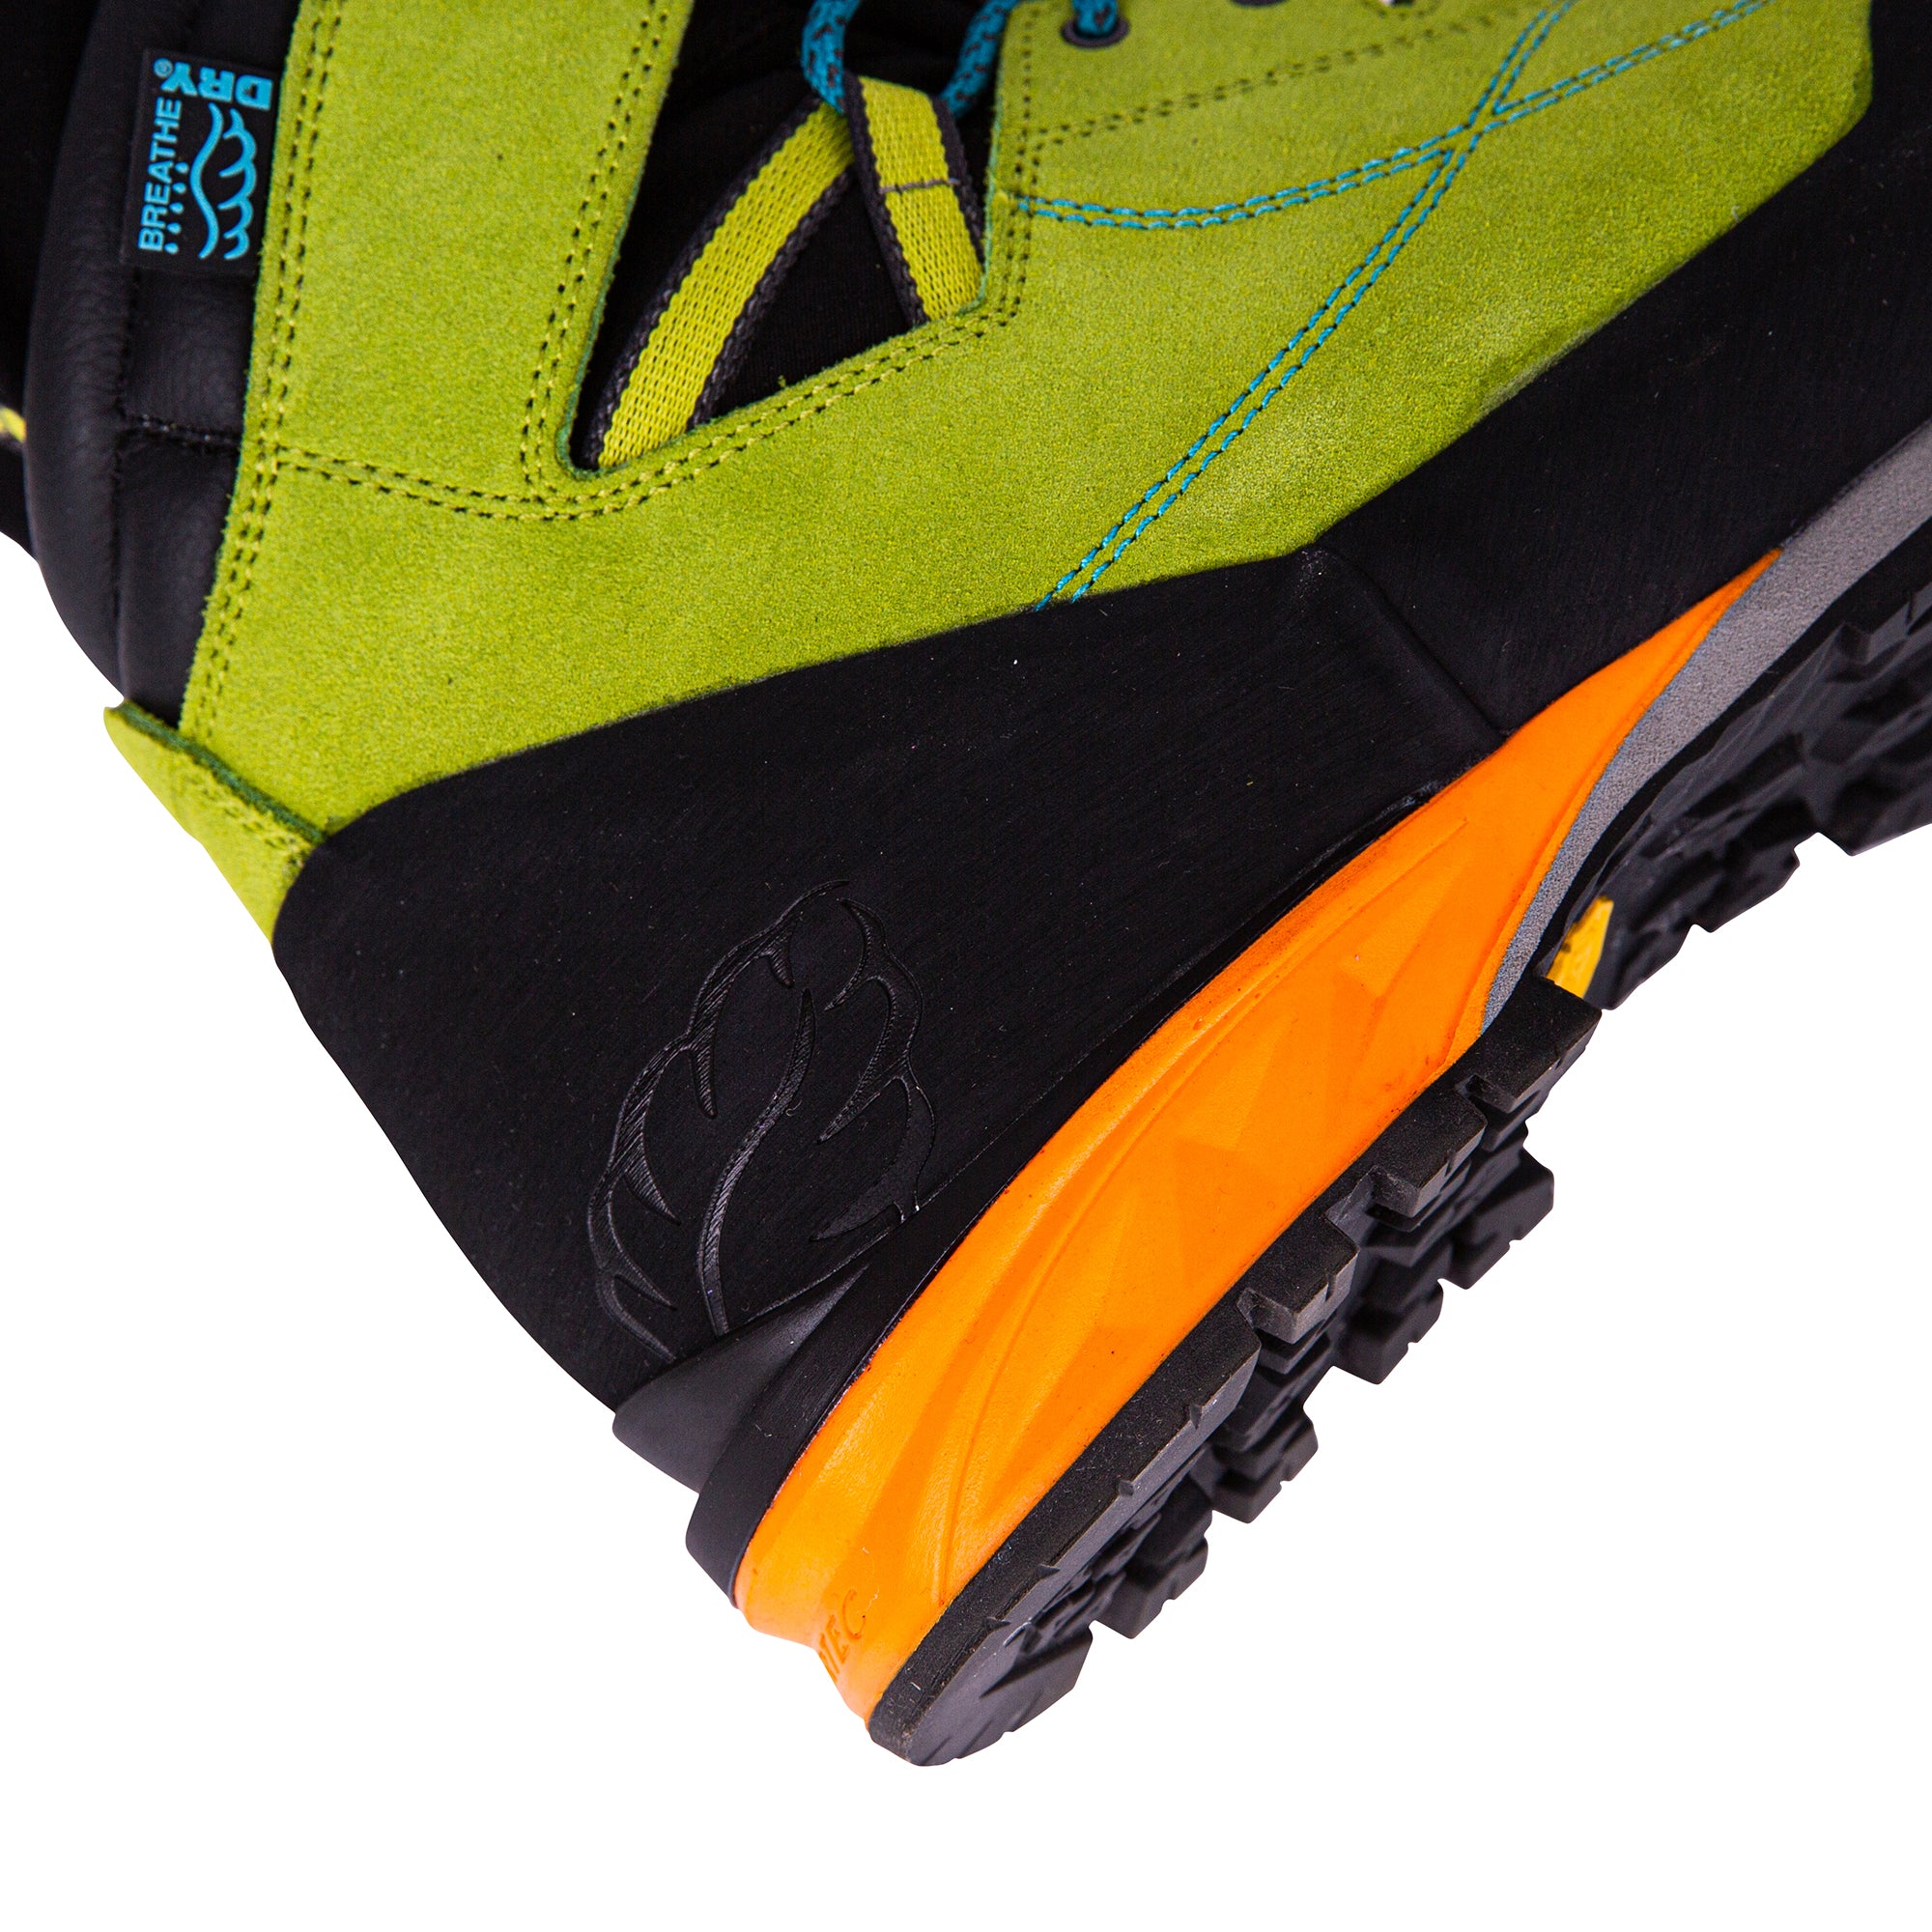 AT34000 Kayo Chainsaw Boot - Lime